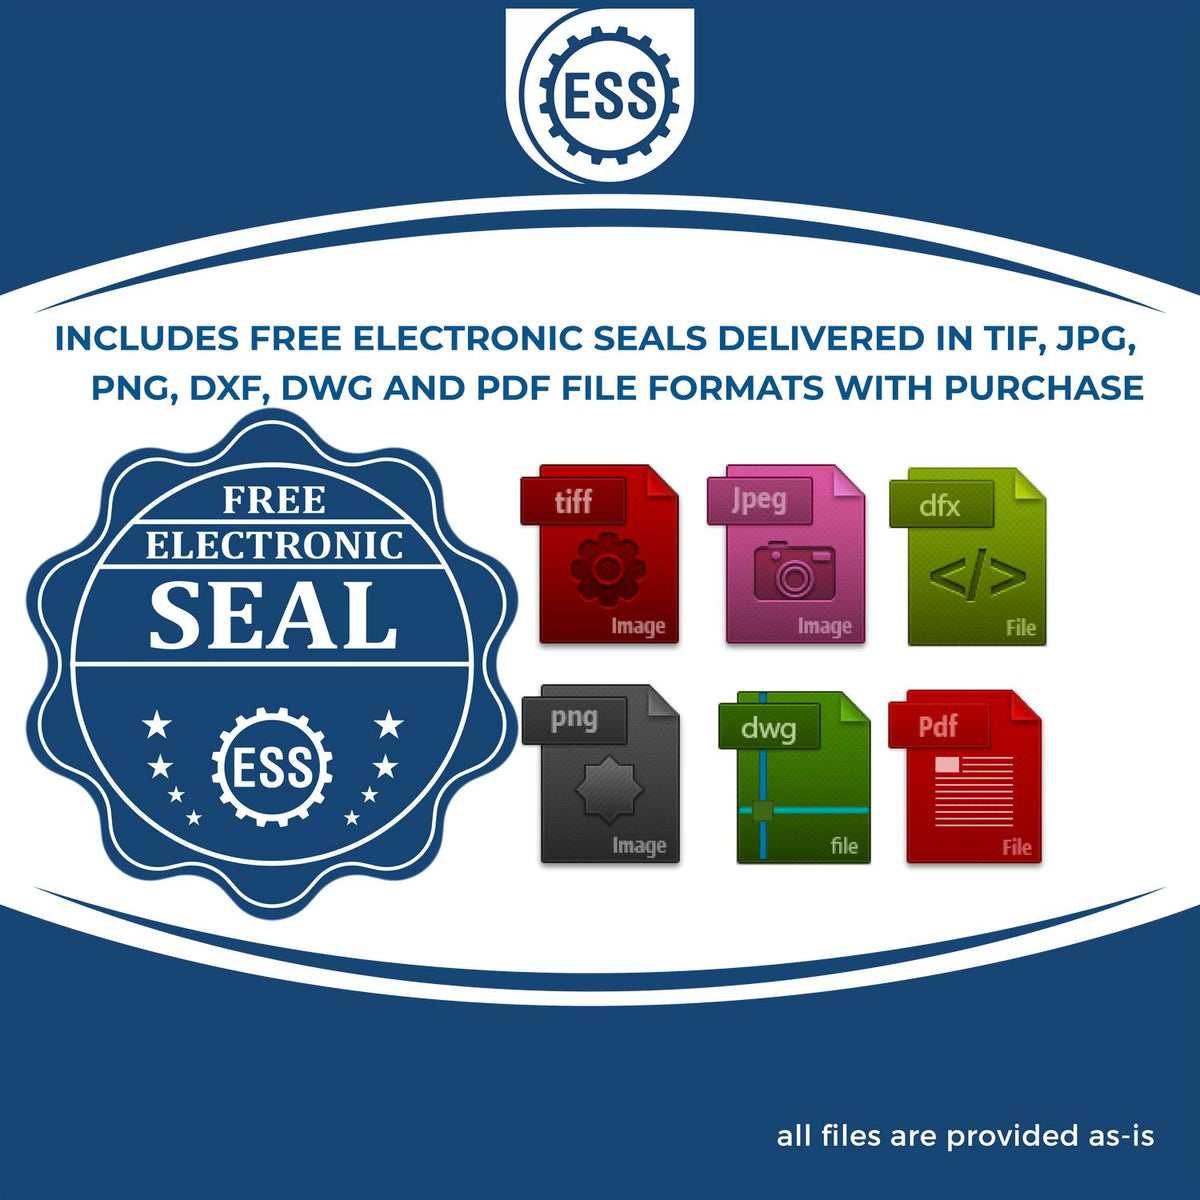 An infographic for the free electronic seal for the Handheld Connecticut Professional Geologist Embosser illustrating the different file type icons such as DXF, DWG, TIF, JPG and PNG.